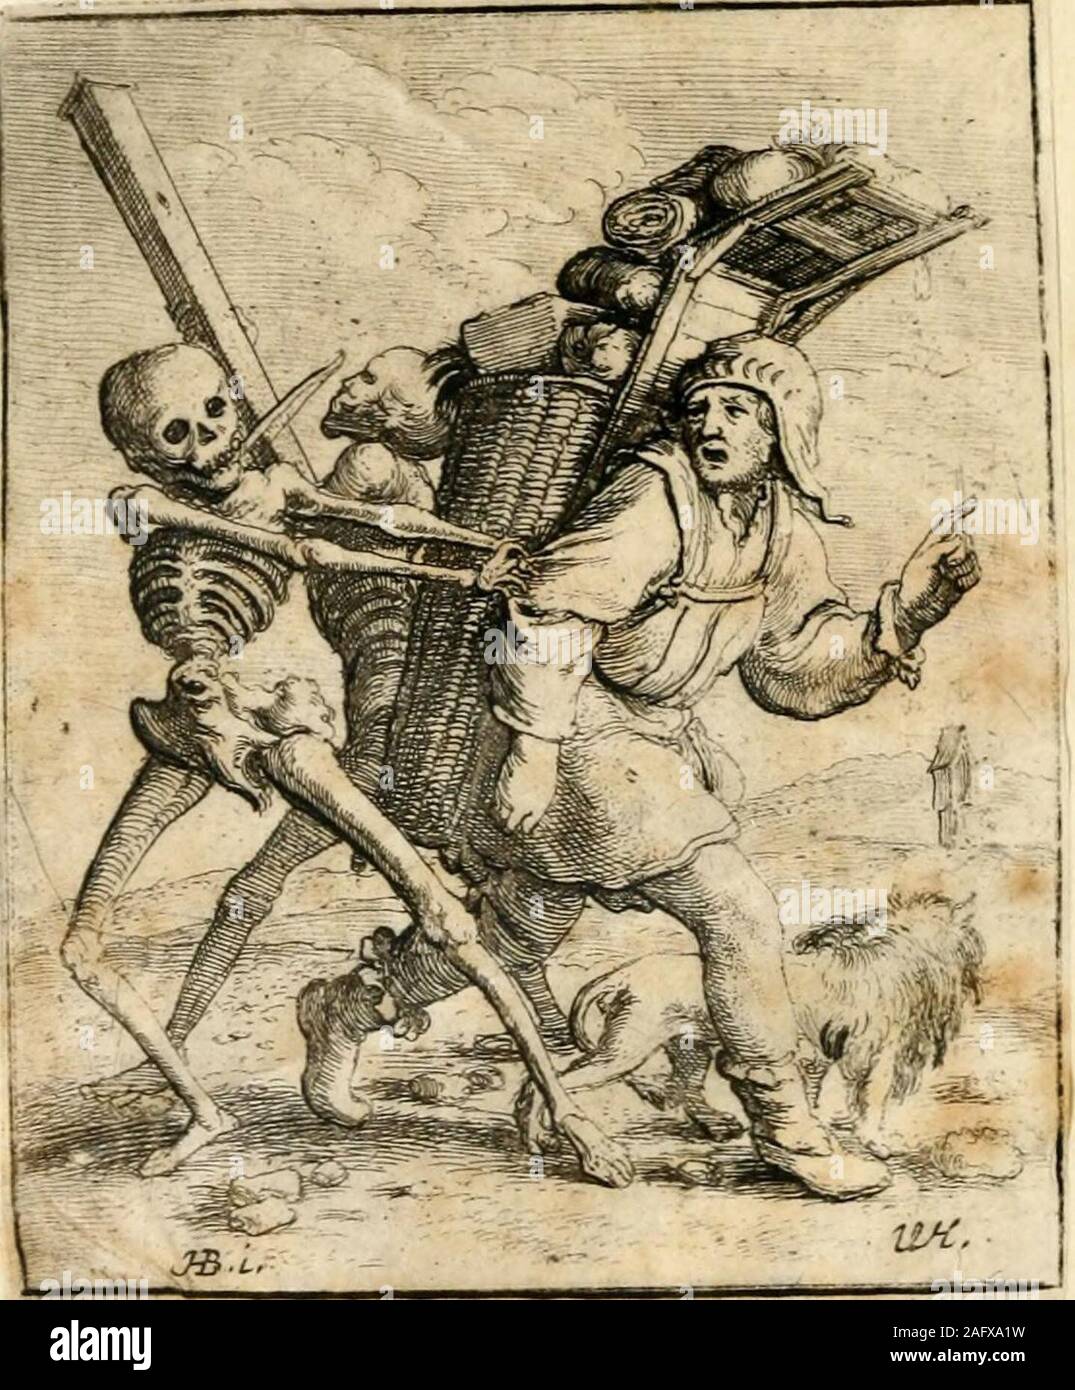 . The dance of death. Venitcaduie oniiie^ c|ui Ltborat 65 THE PEDLAR. XXIV. ACCOMPANIED by his faithful dog,and heavily laden with goods, the poor manis arrested in his progress by the hands ofDeath, who undertakes to ease him of hisburthen. It is in vain that he points to theplace of his destination ; he is forcibly com-pelled to change his route. Another Deathleads off this dance with a jig upon the trump-marine. 66 THE MISER. XXV. DEATH has penetrated into the stronghold of the miser, and seated on a stool, deli-berately collects into a large dish the moneywhich he had been counting, whilst Stock Photo